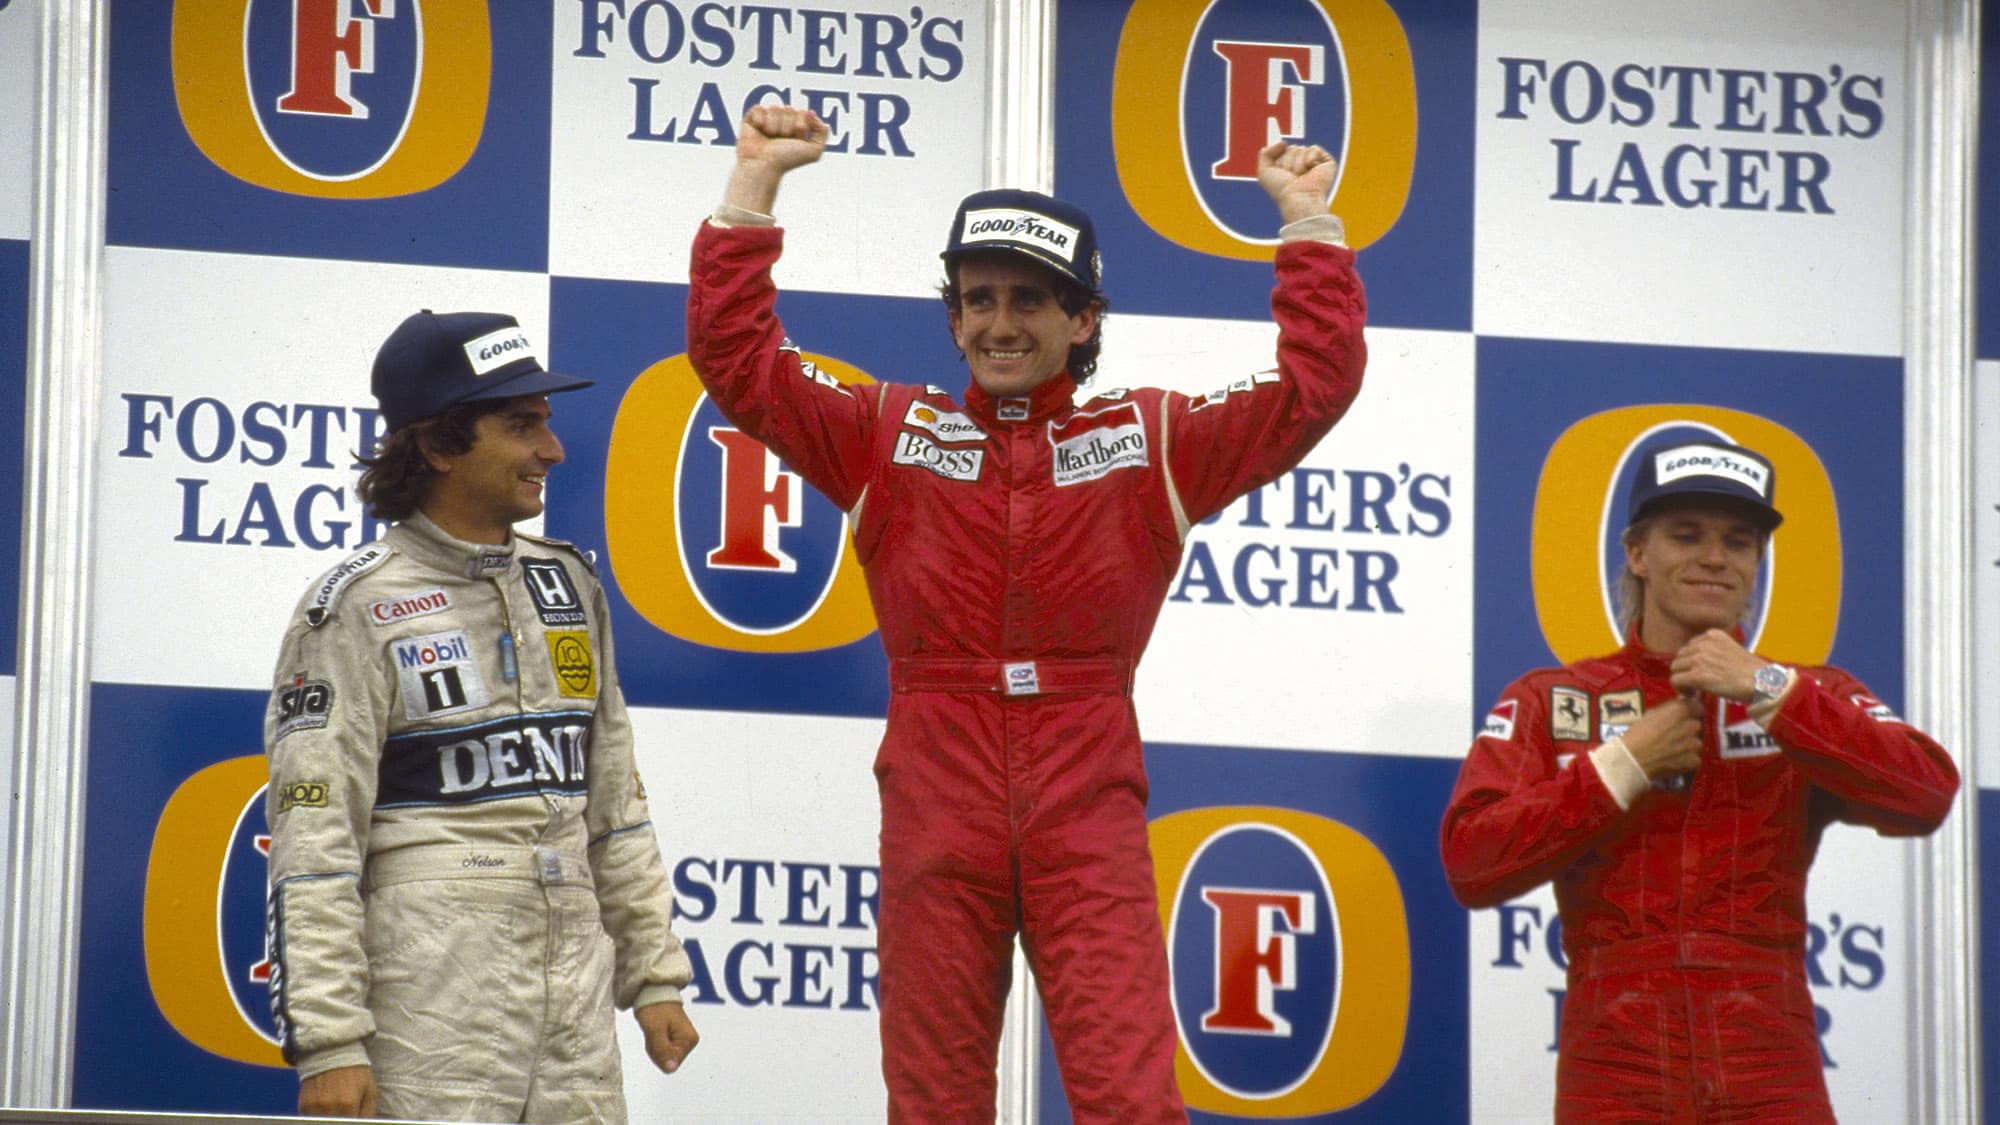 Alain Prost stands on the top of the podium at Adelaide after winning the 1986 Australian Grand Prix and that year's Formula 1 Drivers' championship